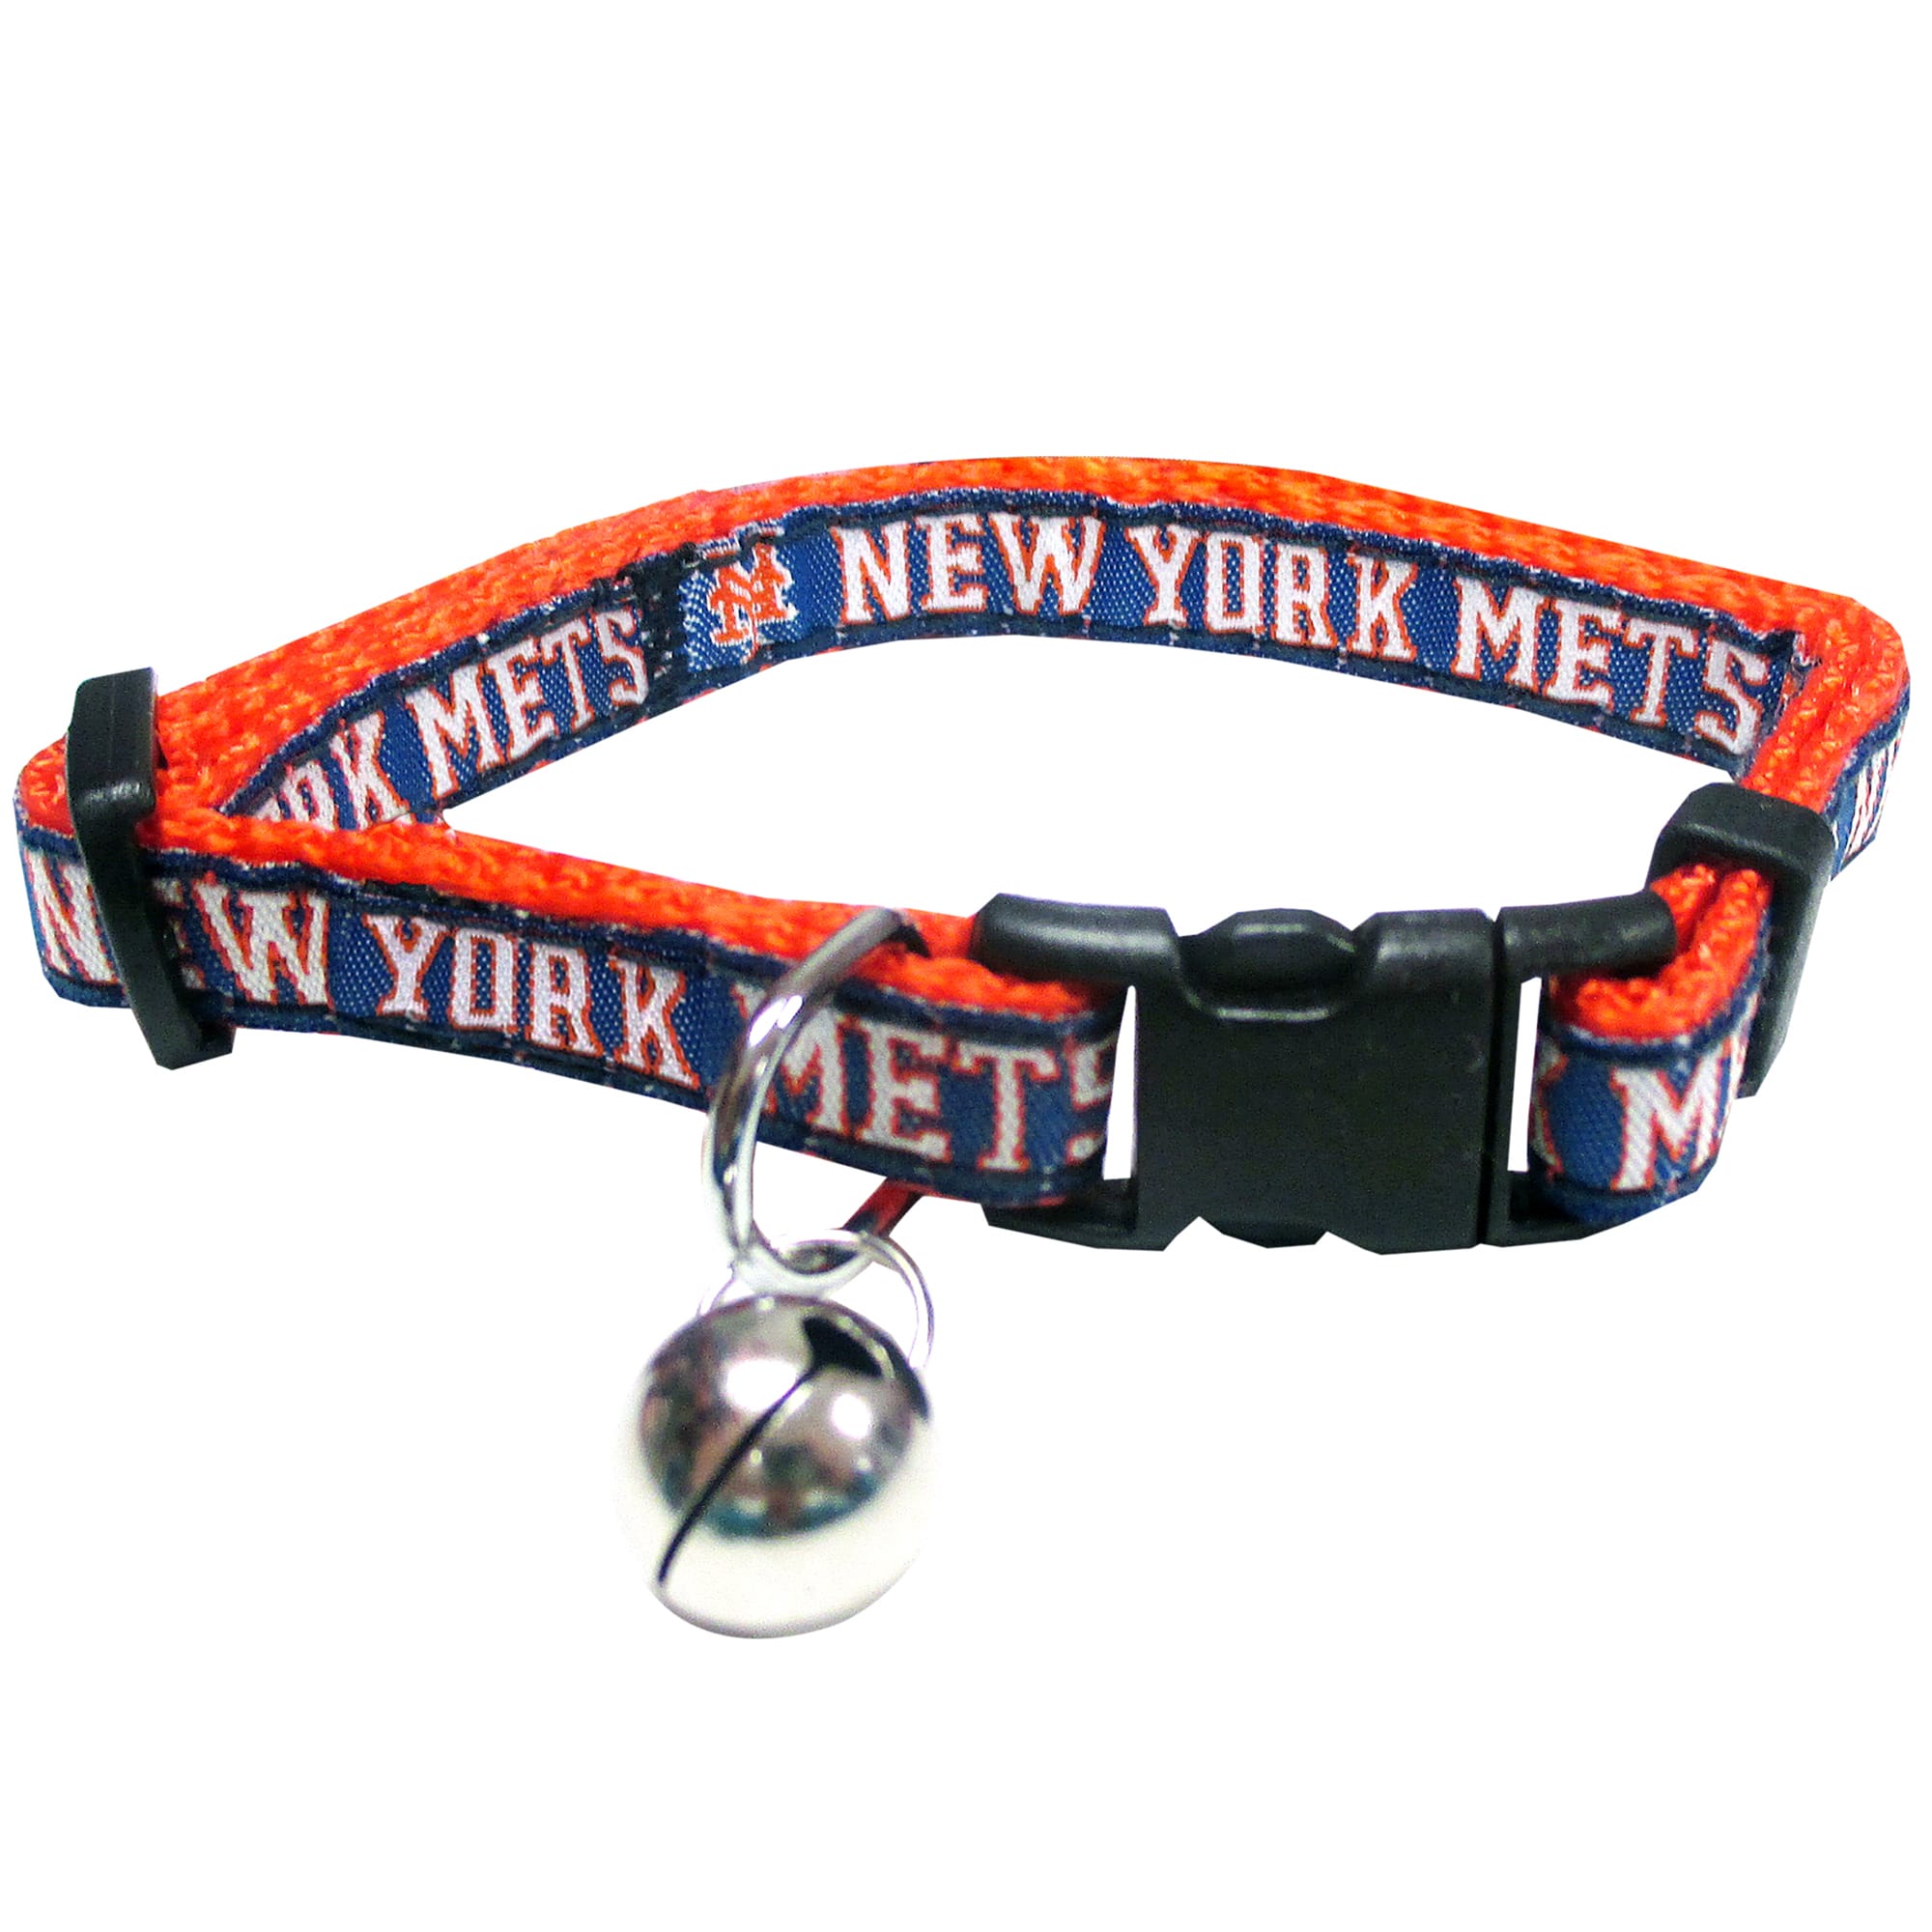 Small Dog Harness, New York Mets Made in USA, dog harnesses, pet clothing